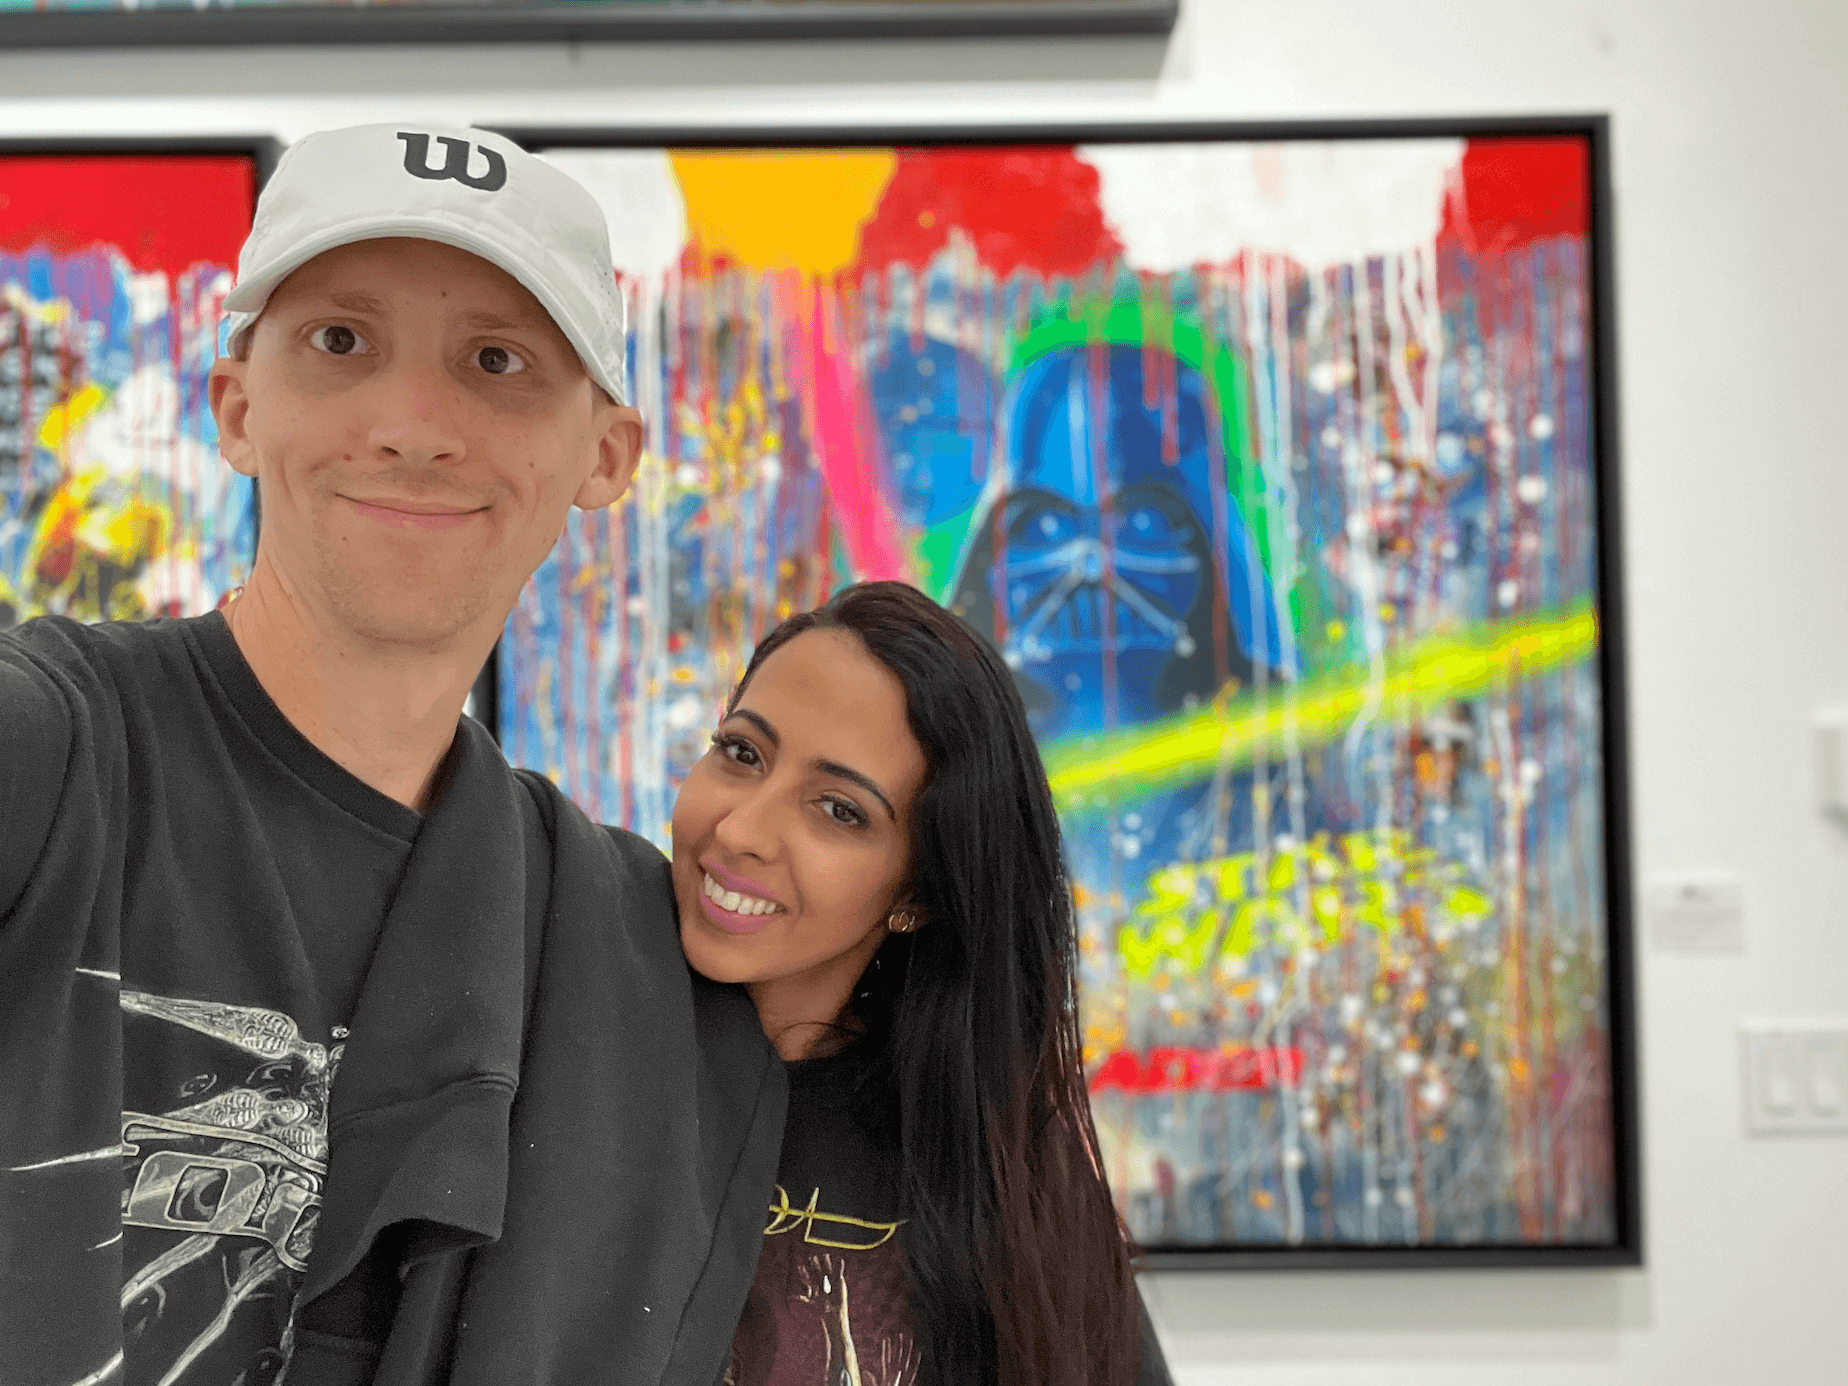 Ethan Lazuk and Dania Lazuk in an art gallery.